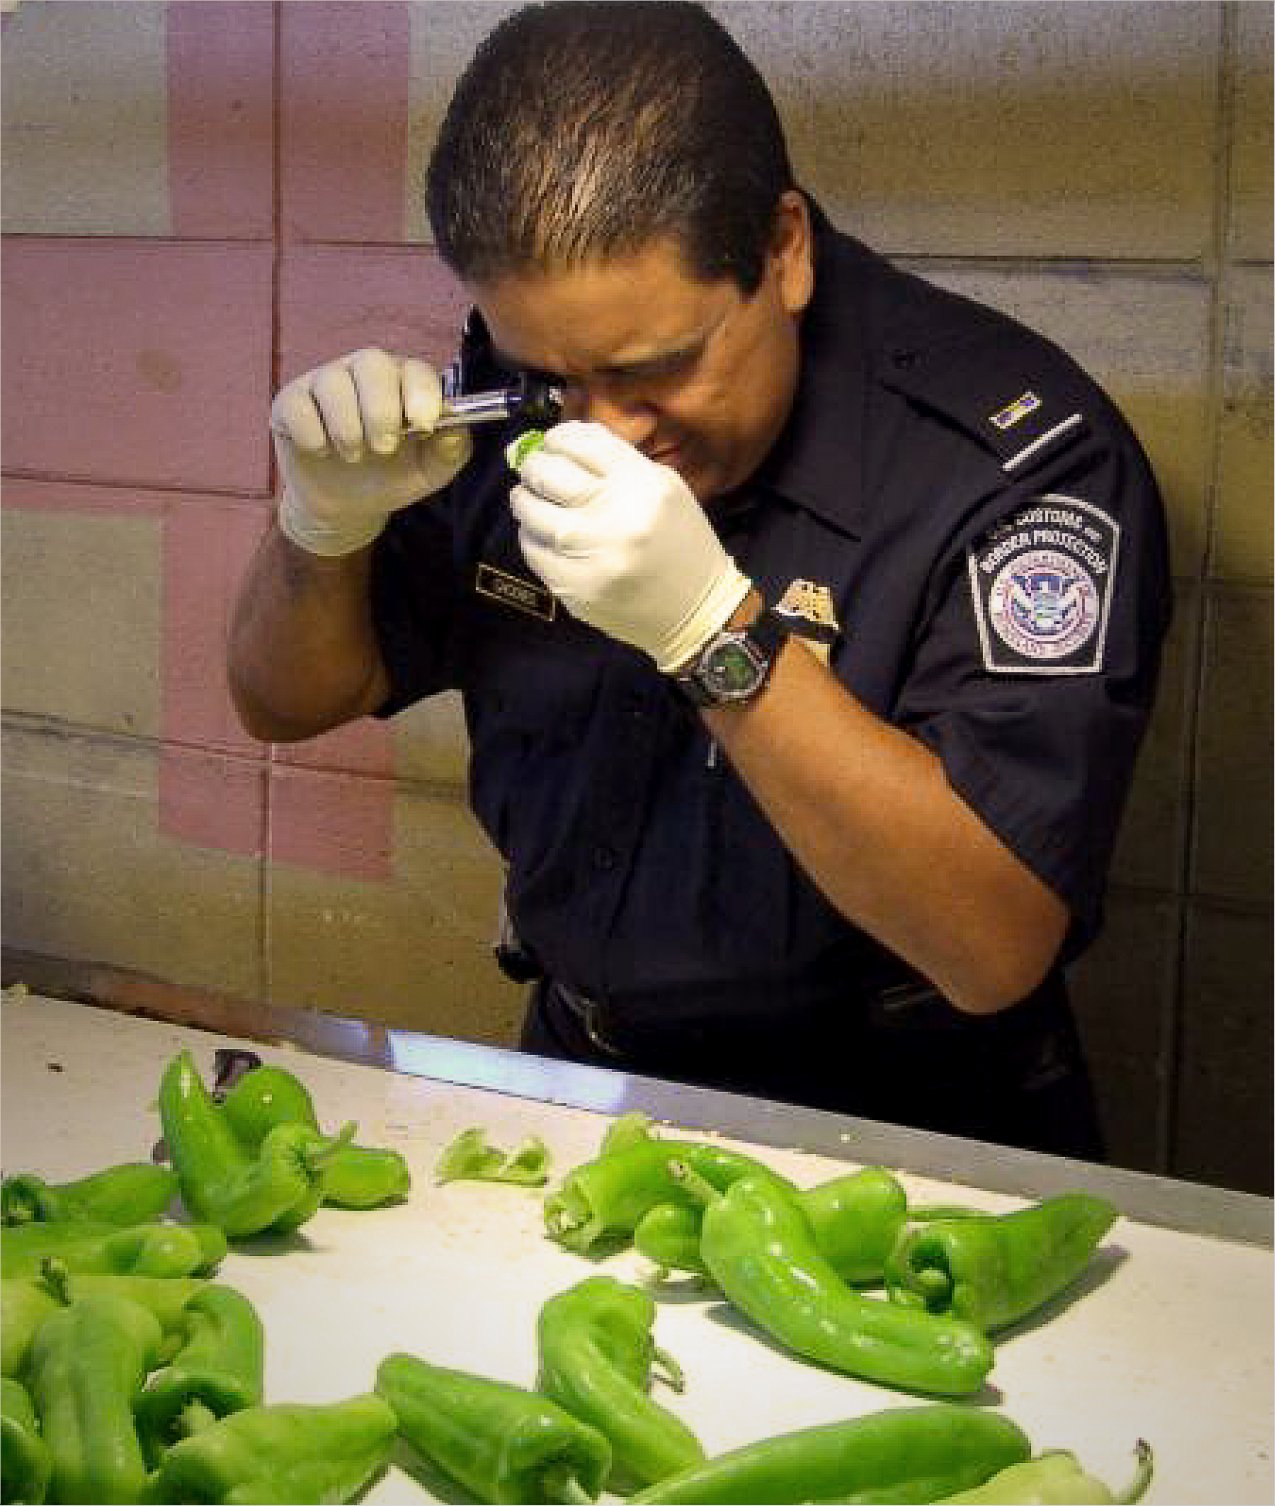 US Customs offical examines peppers